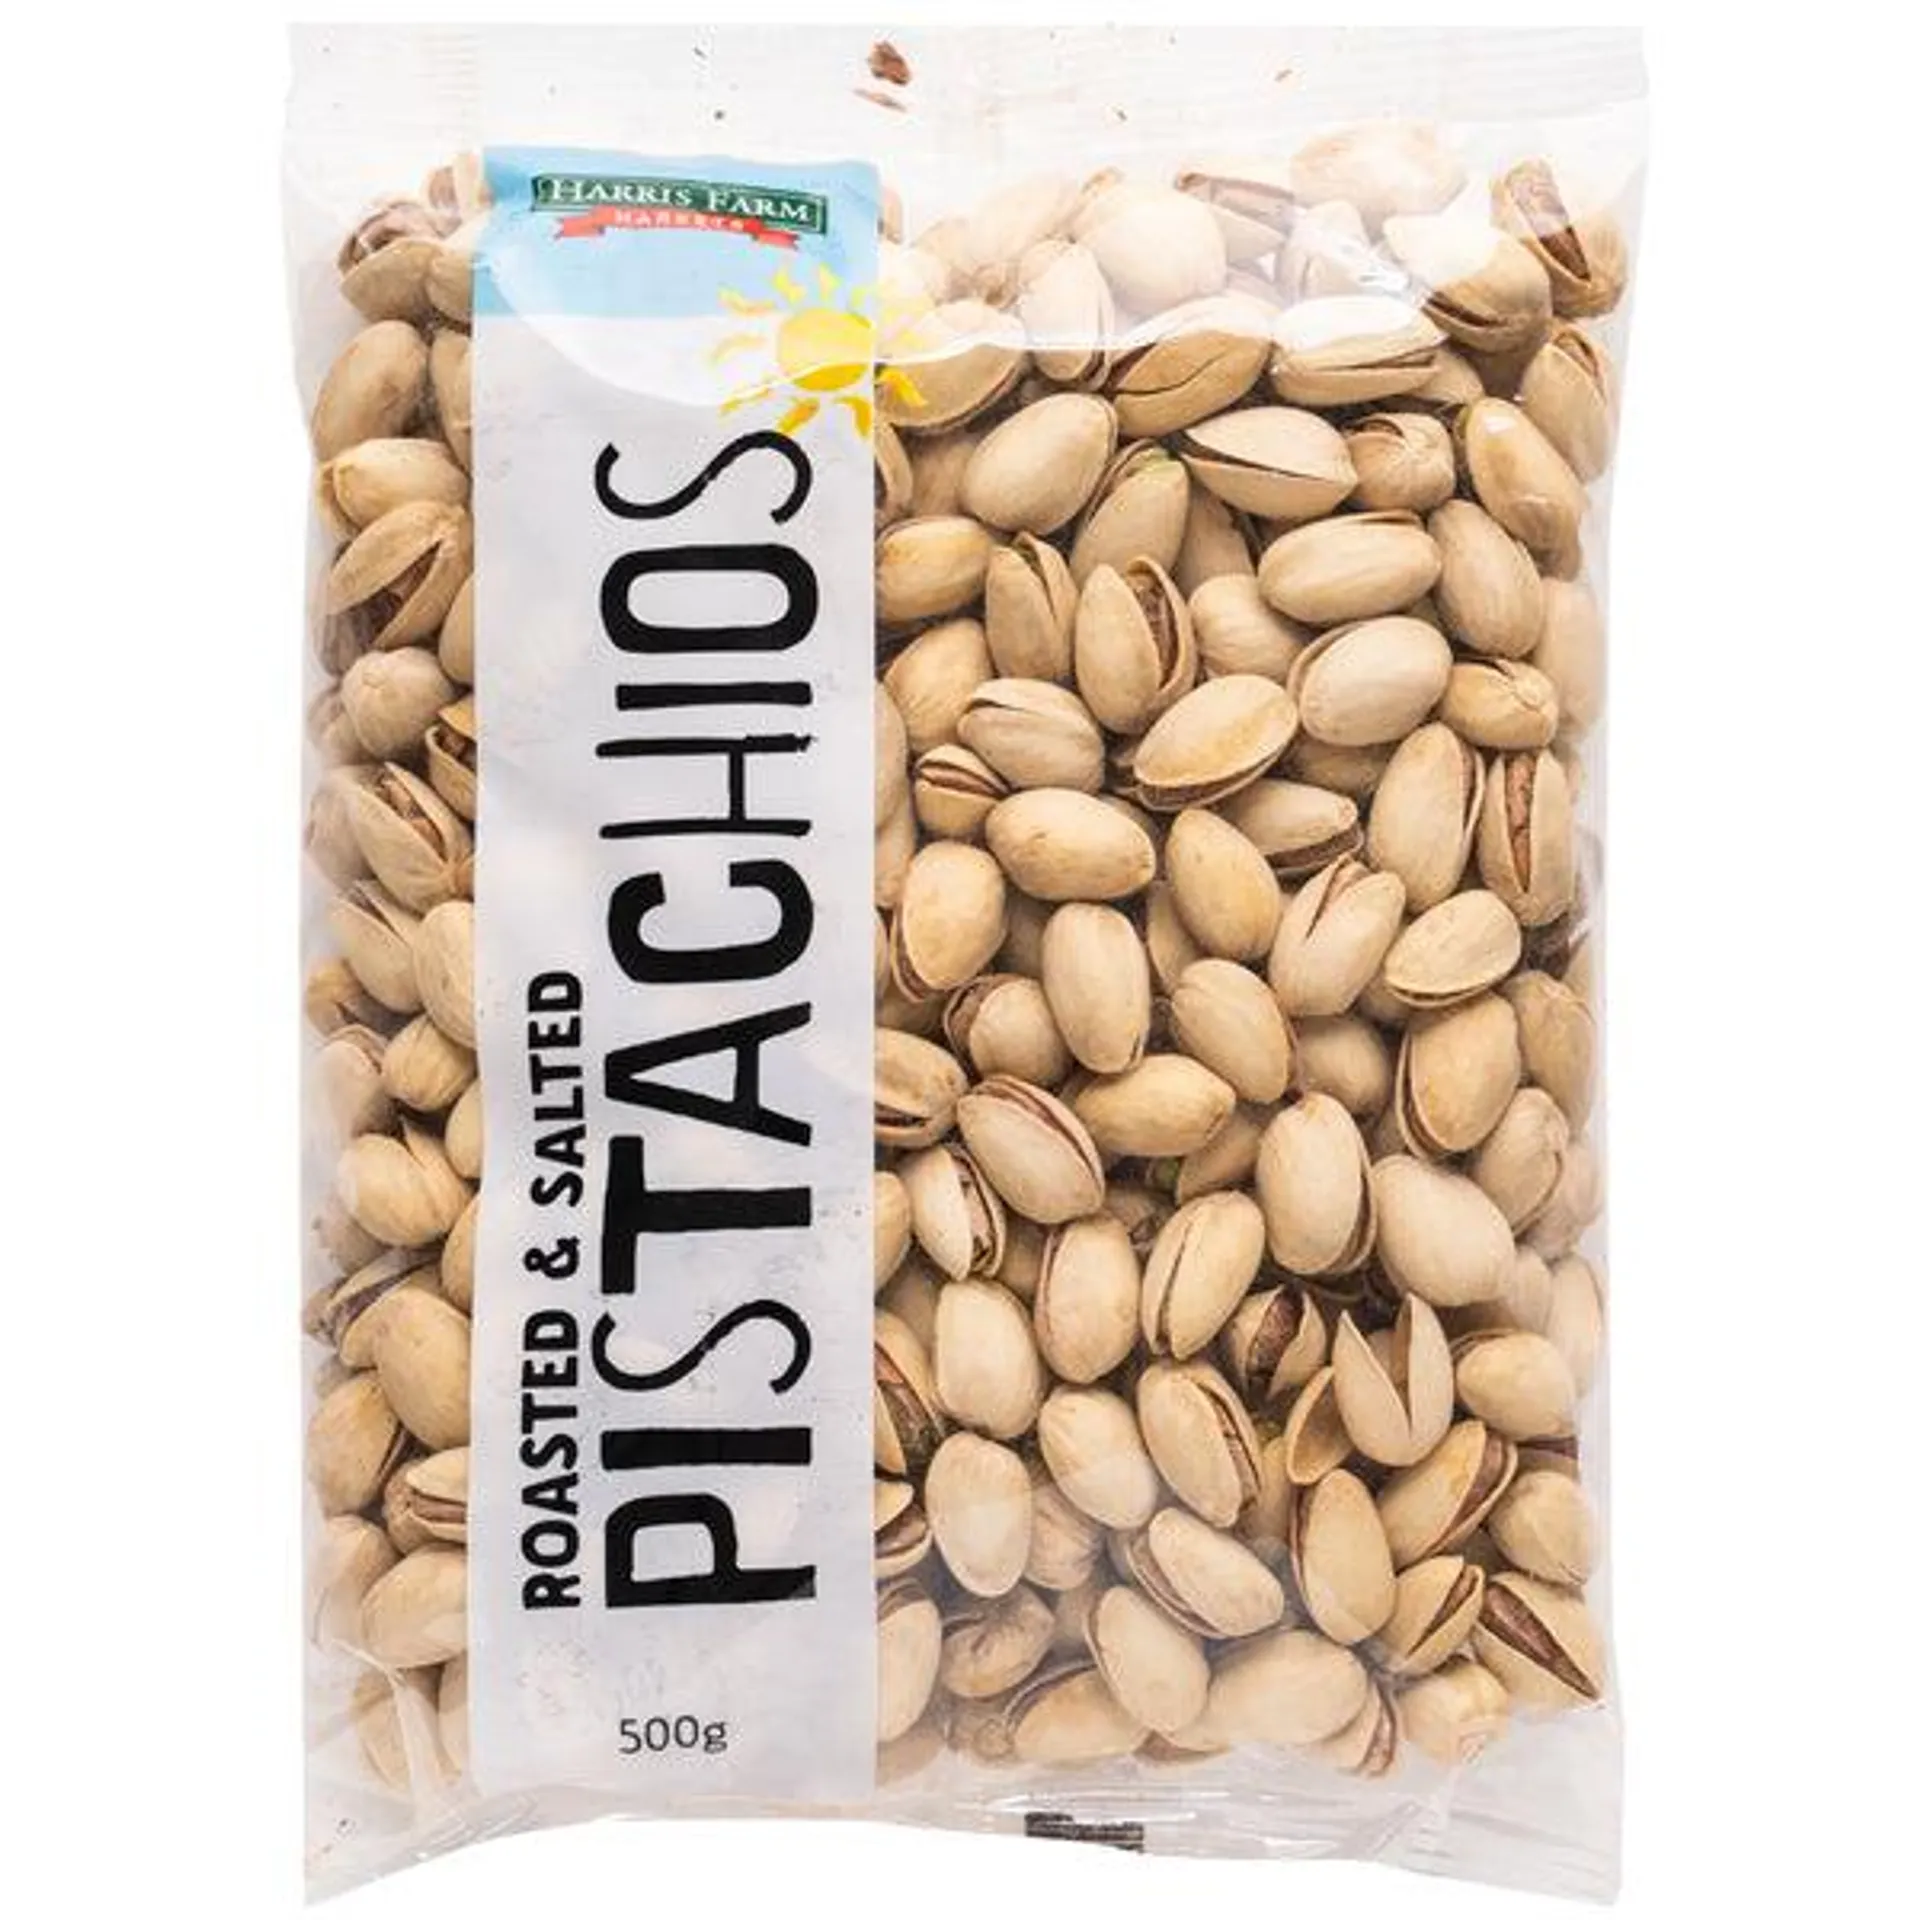 Harris Farm Pistachios Roasted and Salted 500g